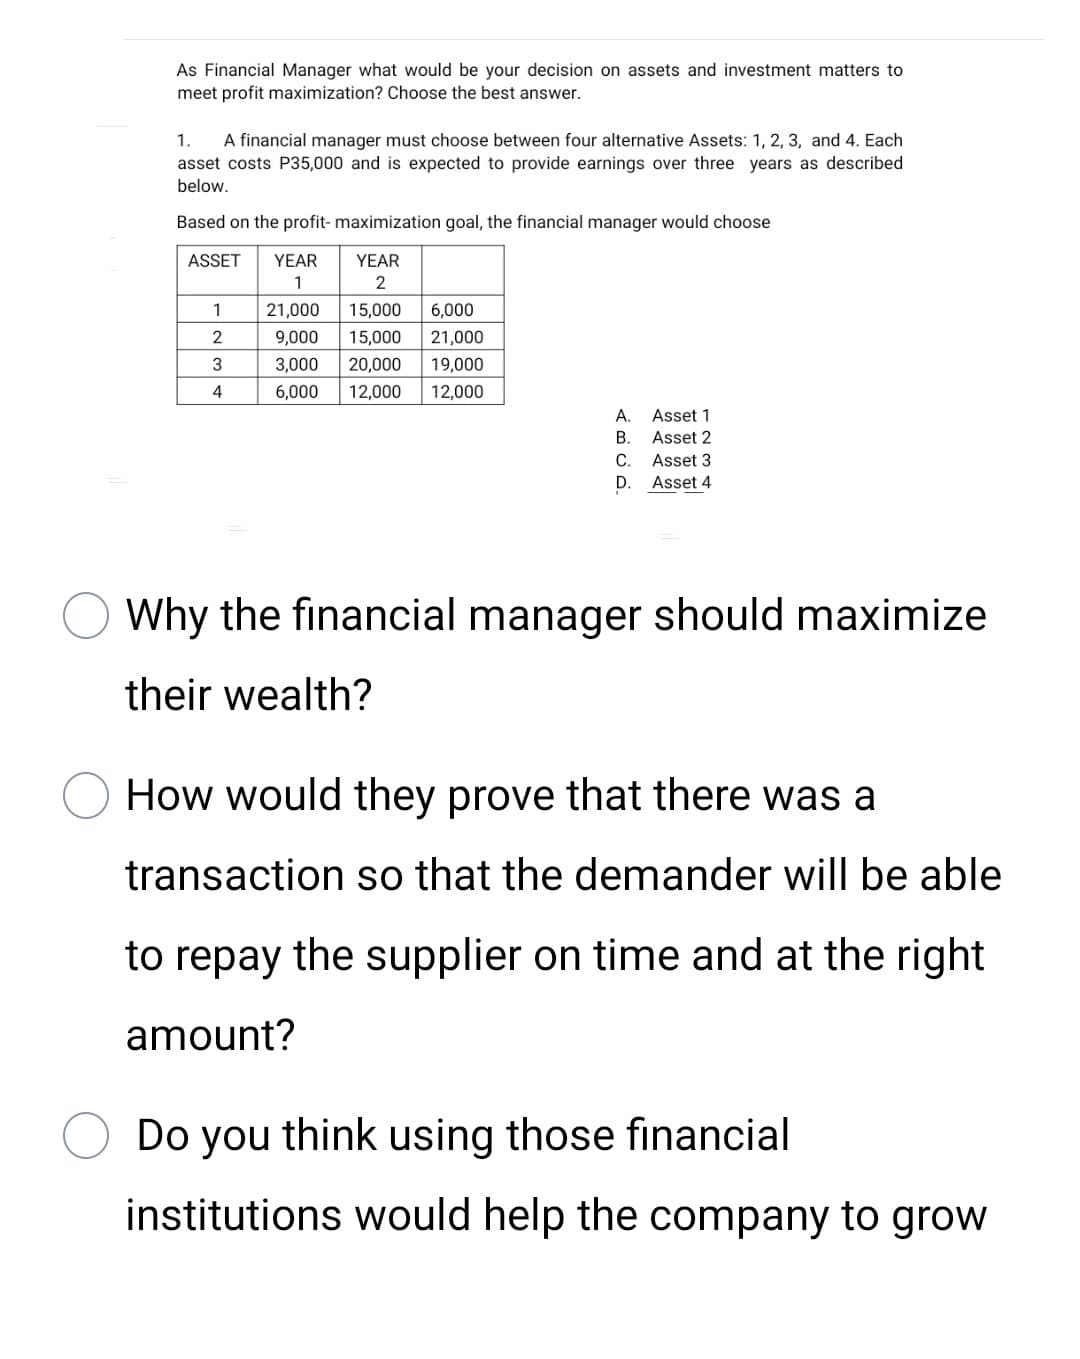 As Financial Manager what would be your decision on assets and investment matters to
meet profit maximization? Choose the best answer.
1.
A financial manager must choose between four alternative Assets: 1, 2, 3, and 4. Each
asset costs P35,000 and is expected to provide earnings over three years as described
below.
Based on the profit- maximization goal, the financial manager would choose
ASSET
YEAR
YEAR
1
2
1
21,000
15,000
6,000
2
9,000
15,000
21,000
3
3,000
20,000
19,000
4
6,000
12,000
12,000
А.
Asset 1
В.
Asset 2
C.
Asset 3
D. Asset 4
Why the financial manager should maximize
their wealth?
How would they prove that there was a
transaction so that the demander will be able
to repay the supplier on time and at the right
amount?
Do you think using those financial
institutions would help the company to grow
